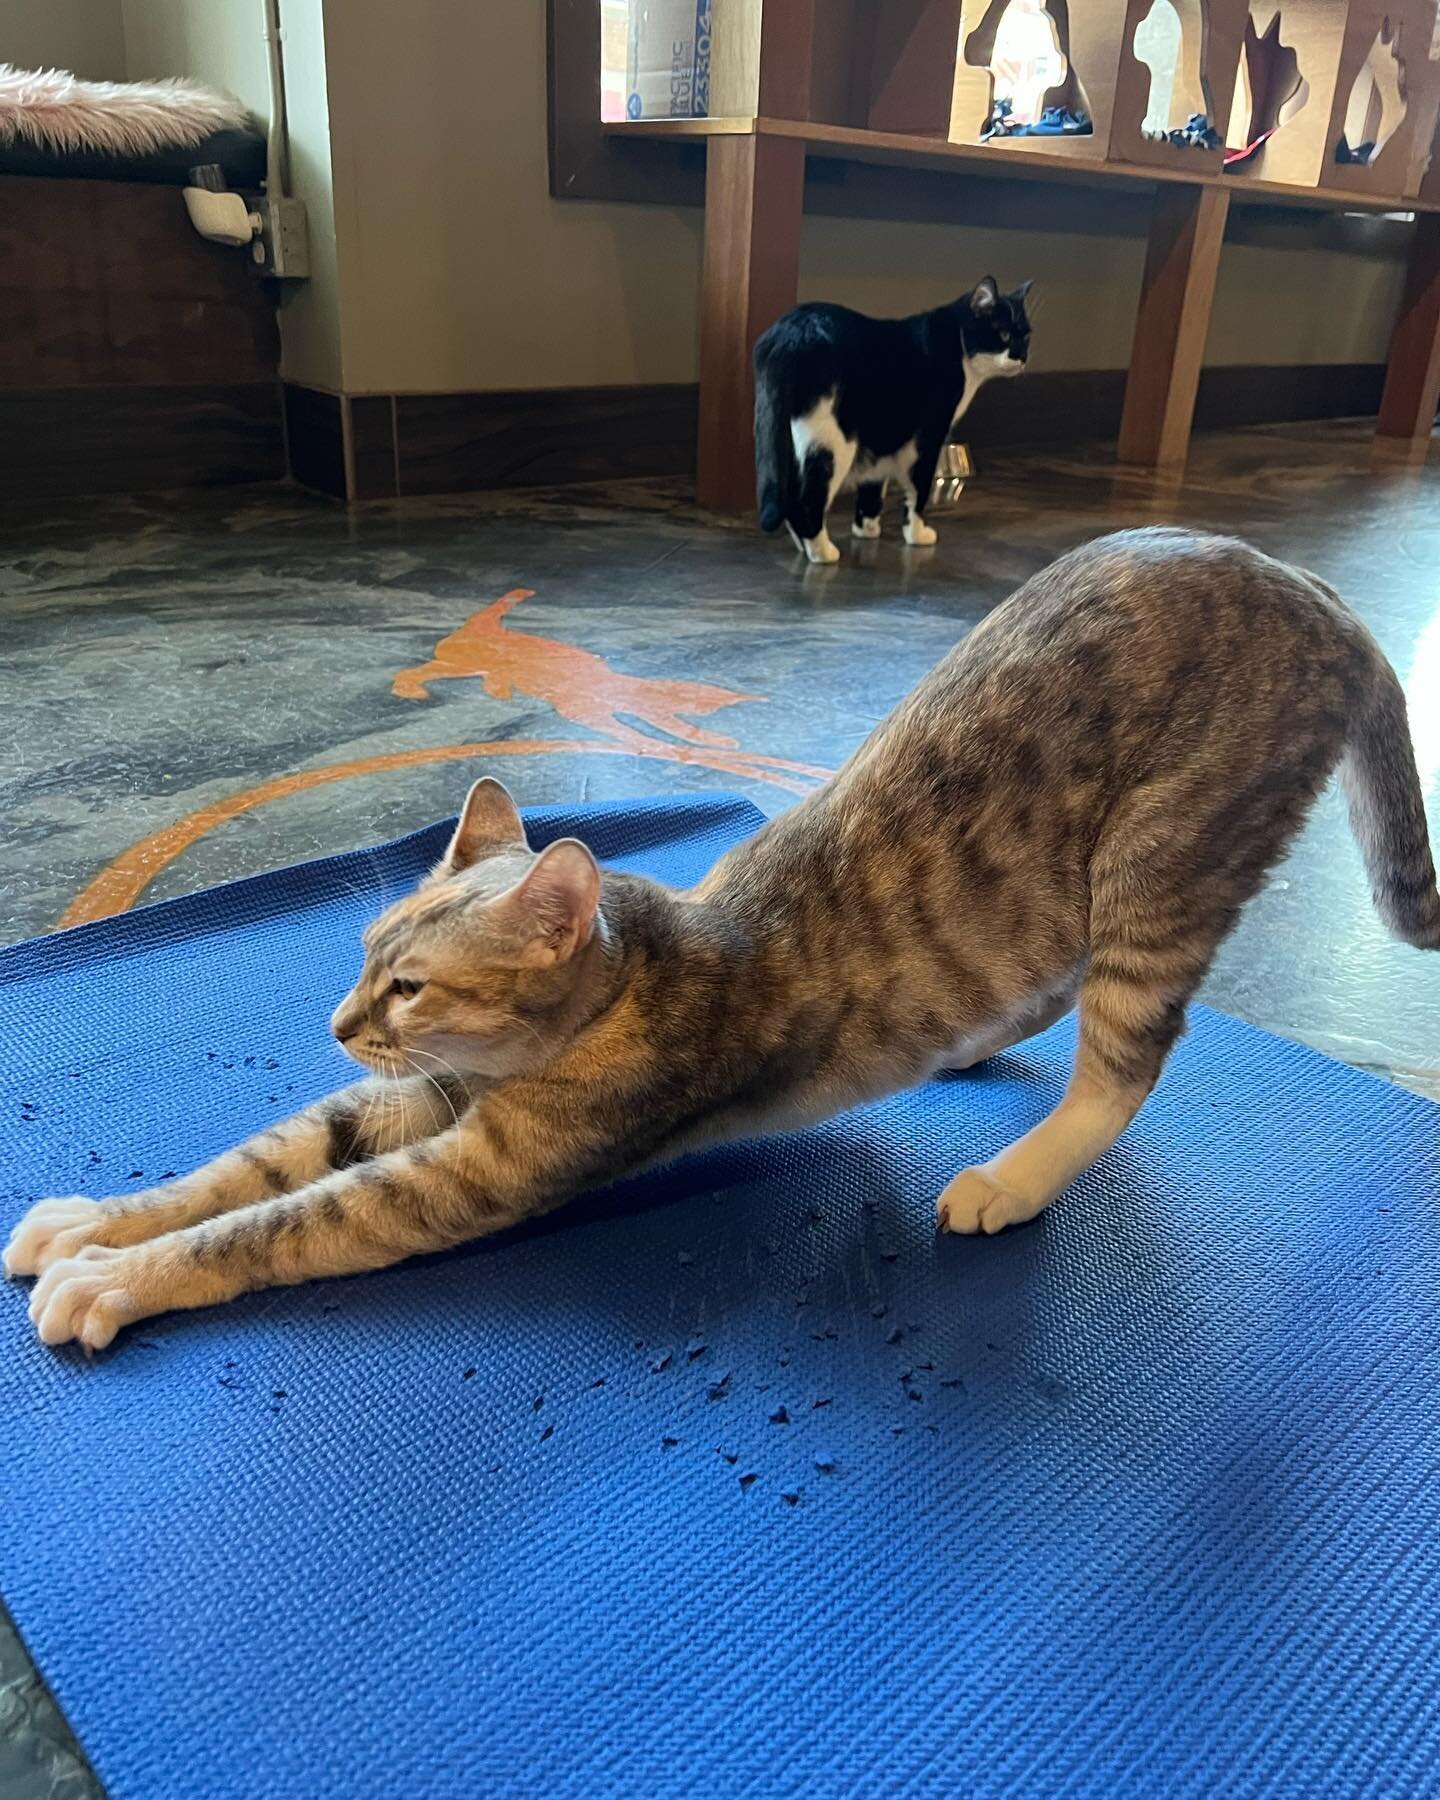 Nothing will make you happier than some downward facing cat with a bunch of cats! 😻🧘&zwj;♀️ We have Meowga every Saturday &amp; Sunday 10:30-11:30 am with Ginger and Tuesdays 6-7 pm with Josie! Get a 5 class pass and join us weekly! 🐈 #catyoga #me